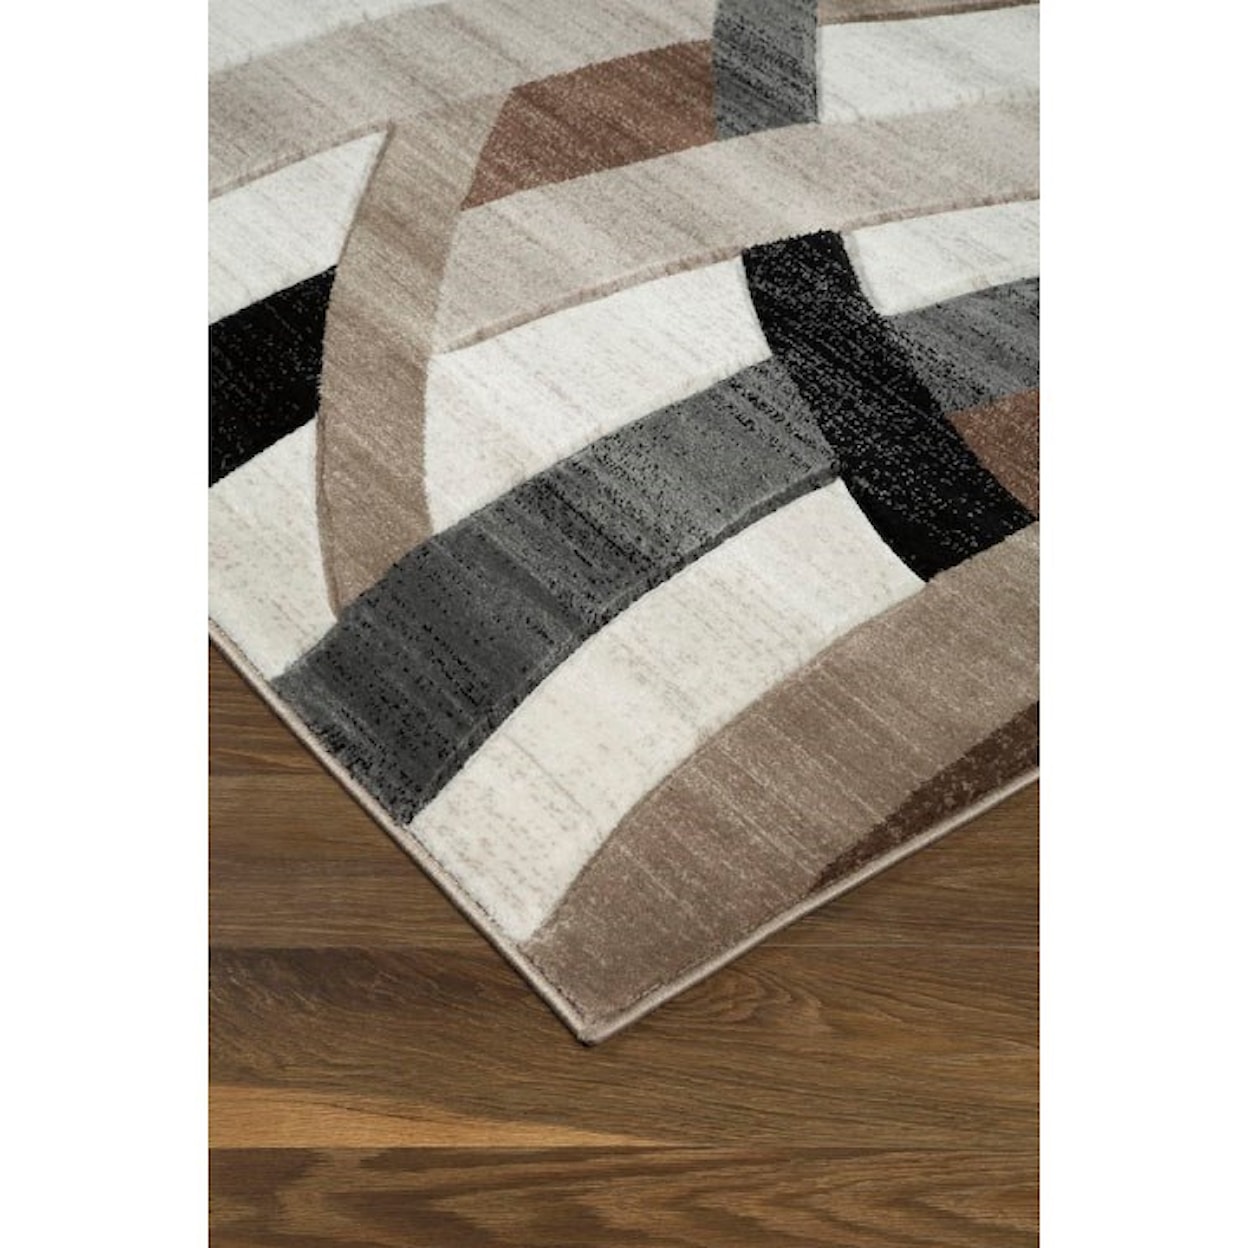 Benchcraft Contemporary Area Rugs Jacinth Brown Large Rug